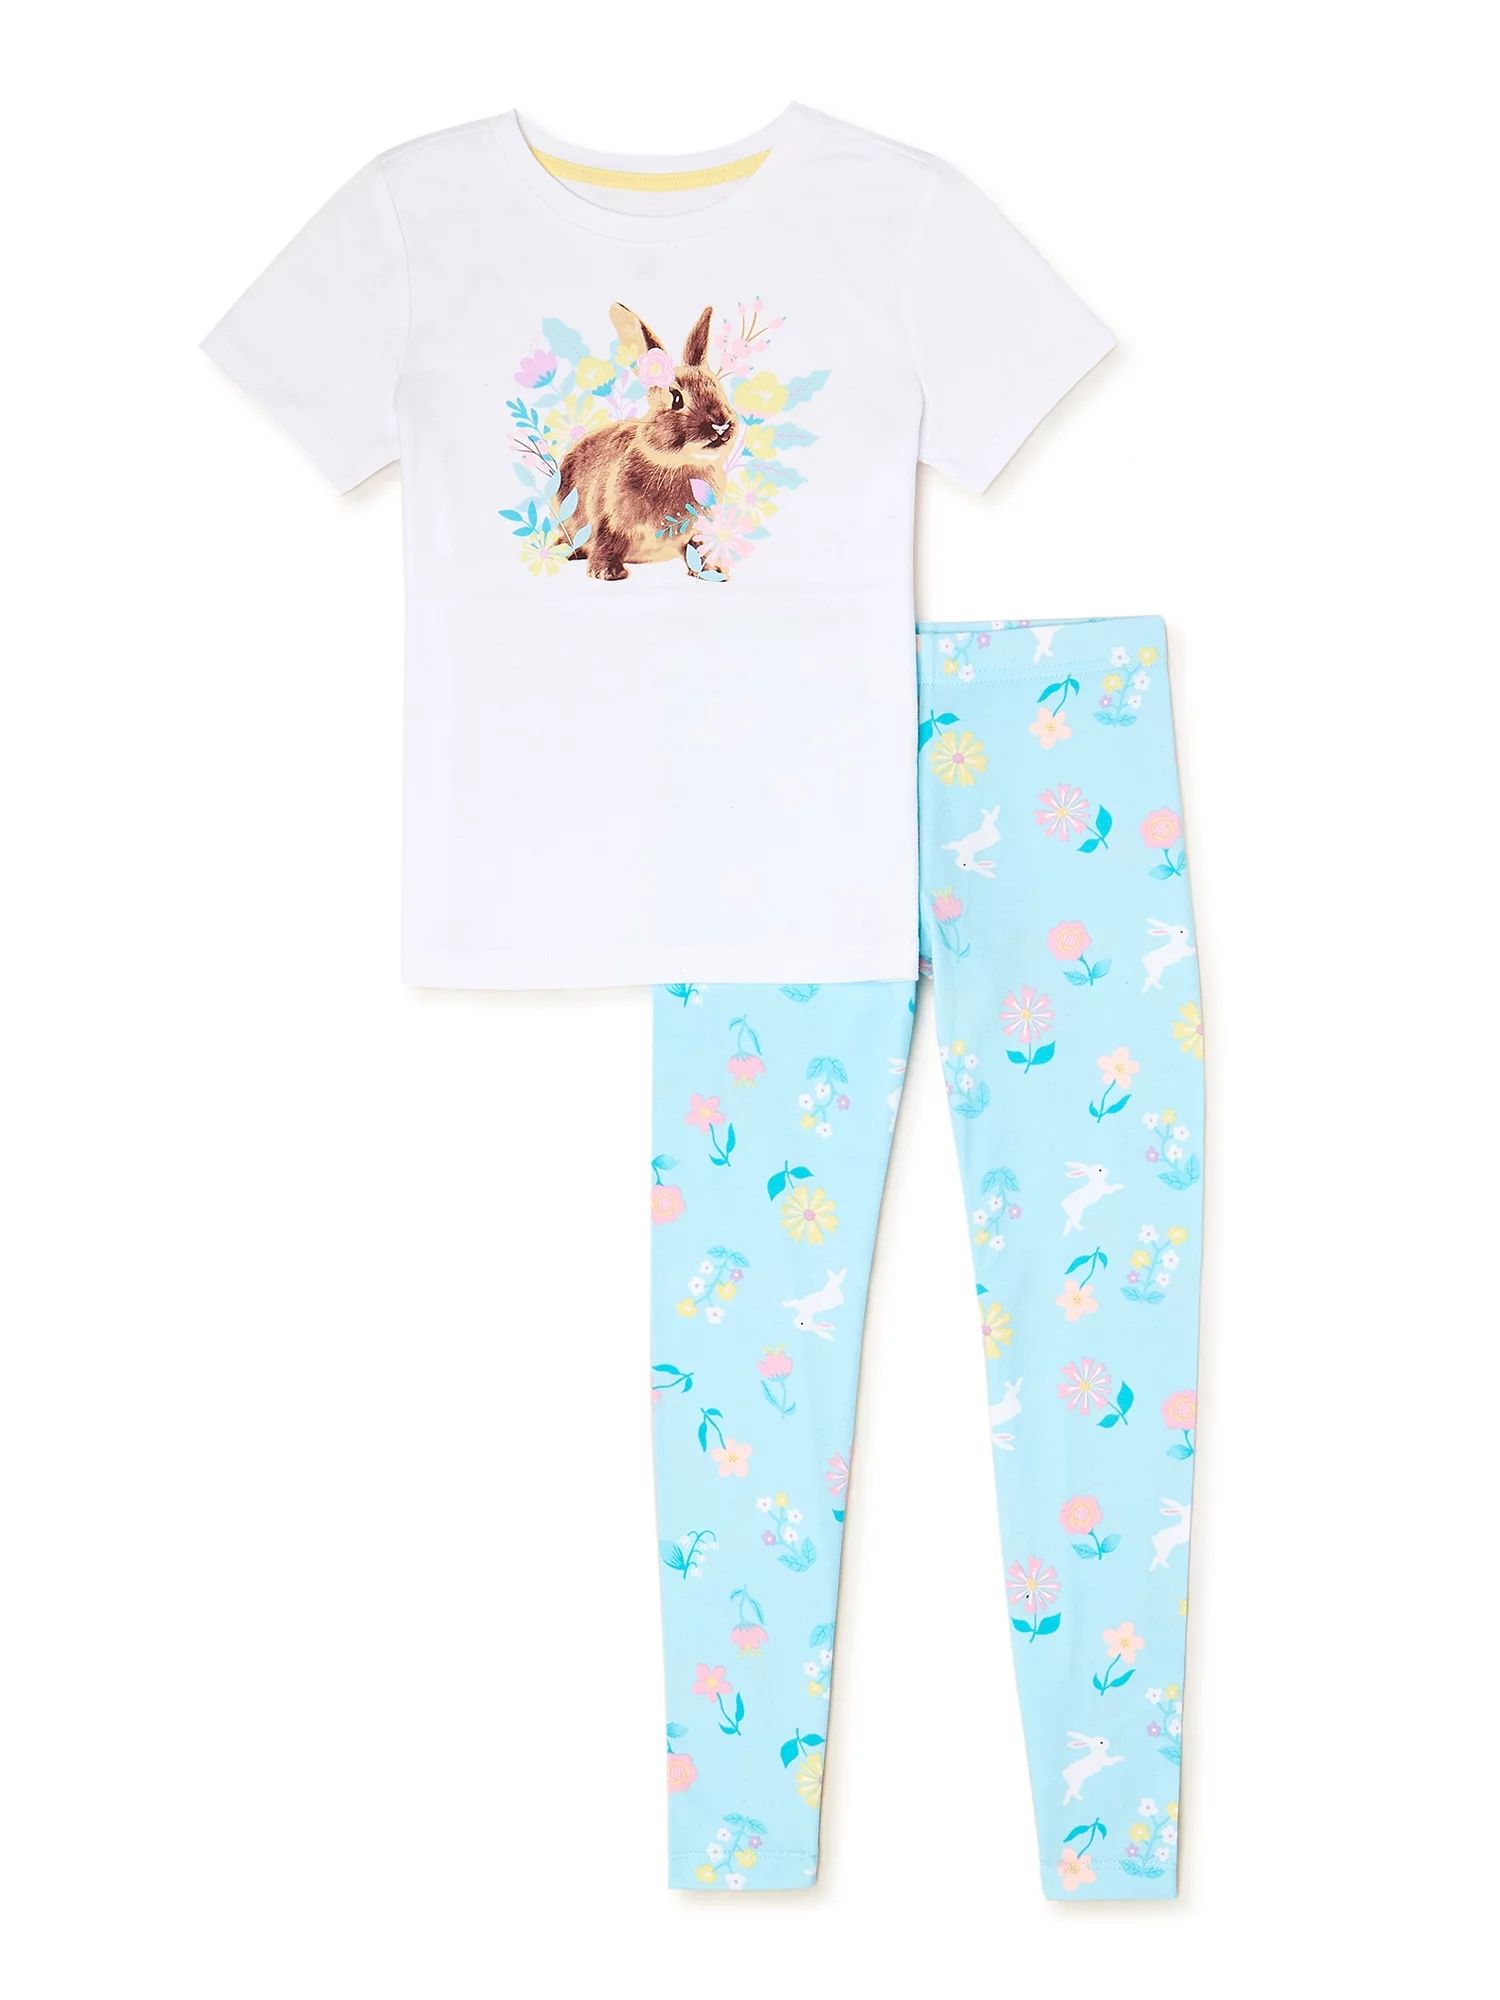 Girls’ Easter T-Shirt and Leggings Outfit, 2-Piece, Sizes 4-18 | Walmart (US)